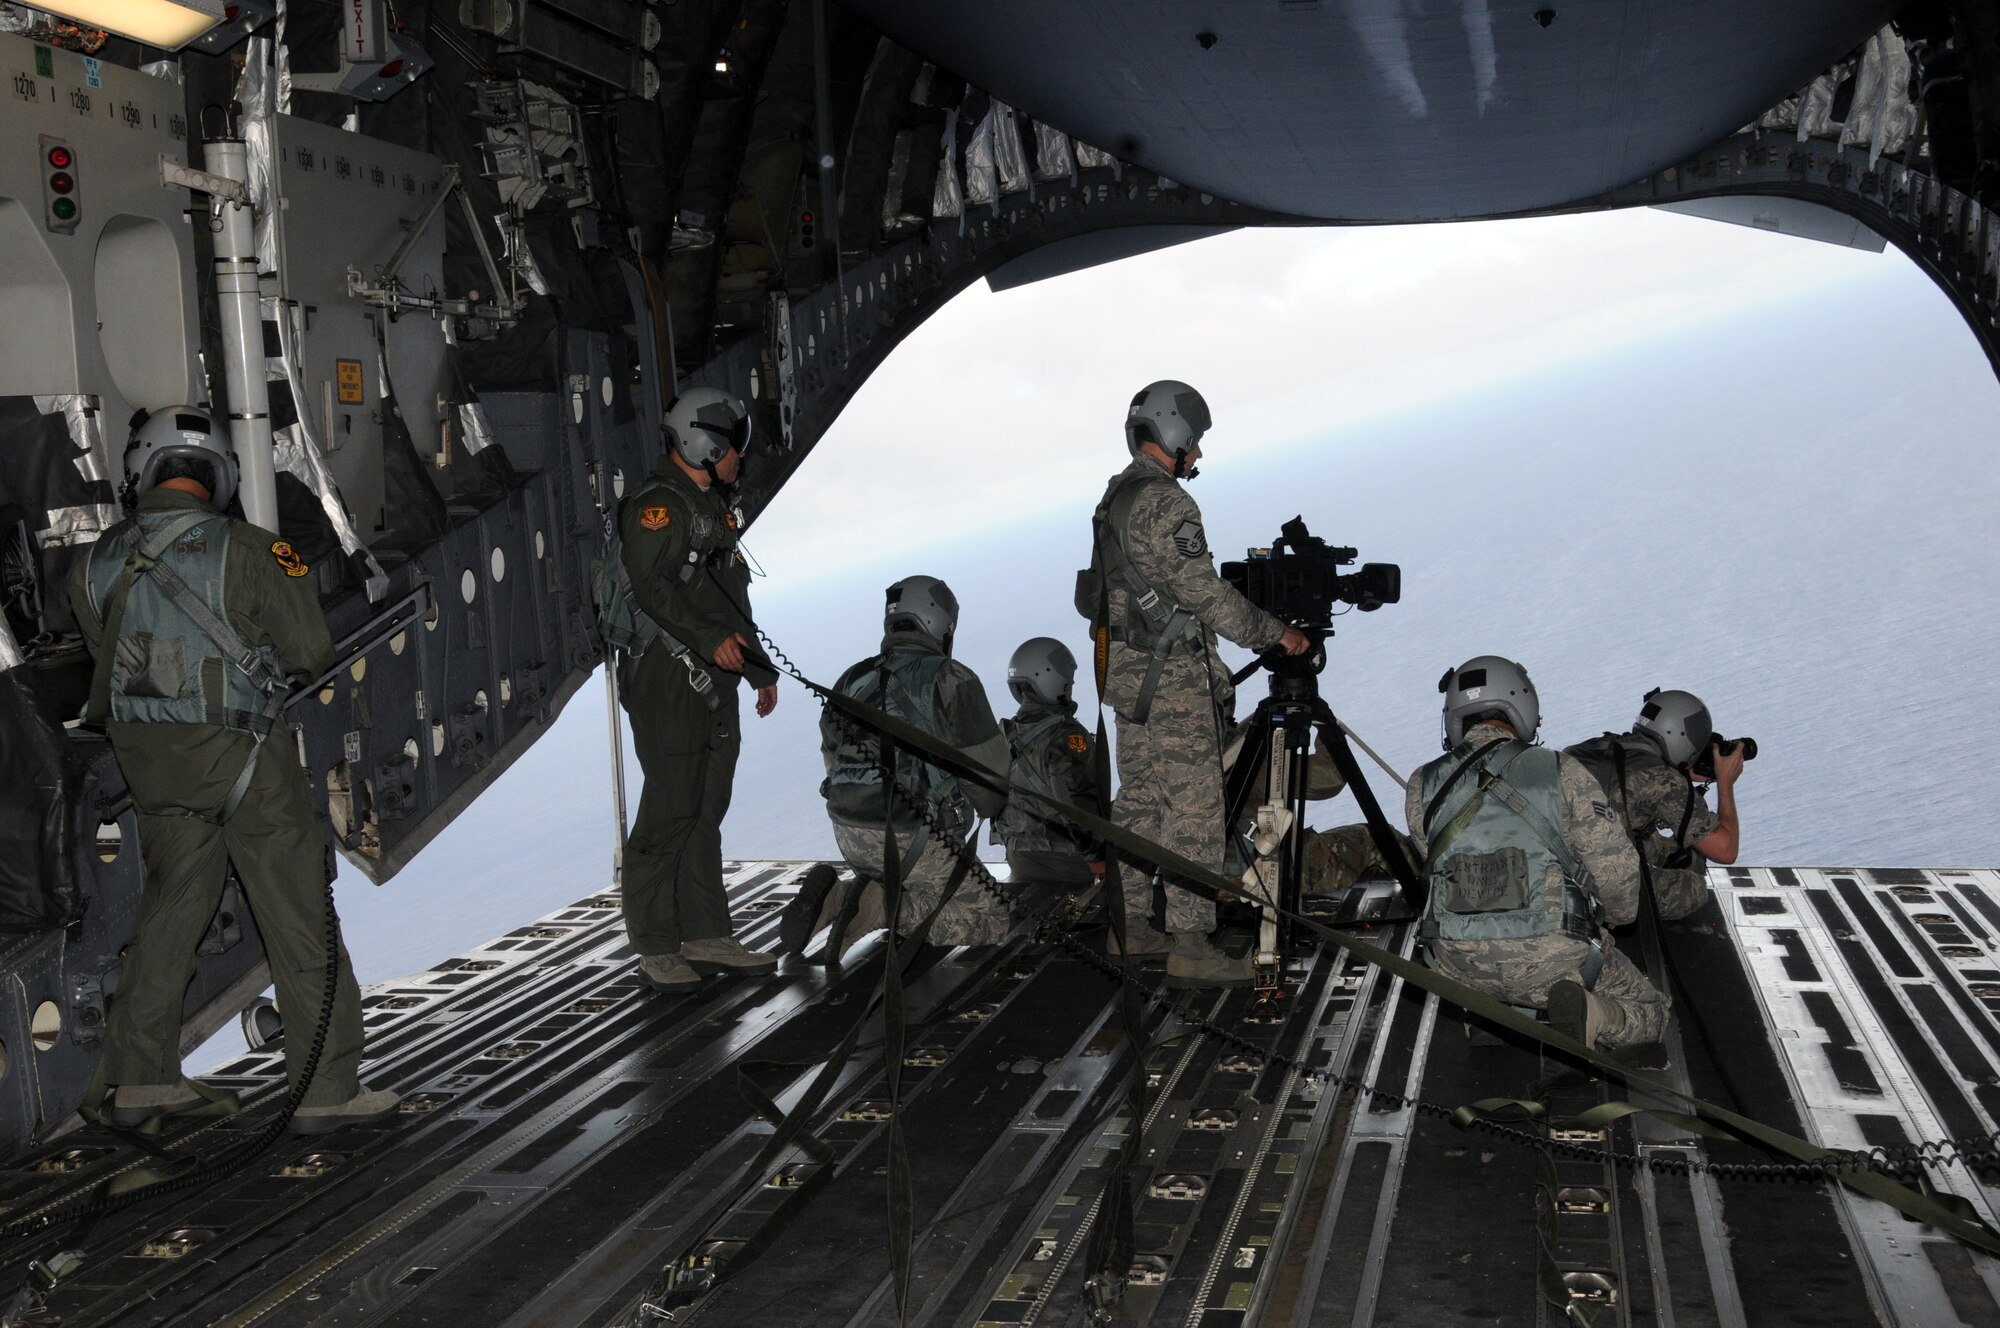 ANG Creative captures video and still imagery during an aerial photo shoot on board a 204th Airlift Squadron C-17 Globemaster, May 18, 2016, Hawaii. ANG Creative is the the Air National Guard visual information team tasked with producing video, radio, photography and graphic design for the ANG Recruiting and Retention Service of the Air Directorate at the National Guard Bureau. (U.S. Air National Guard photo by Airman Stan Pak/released)